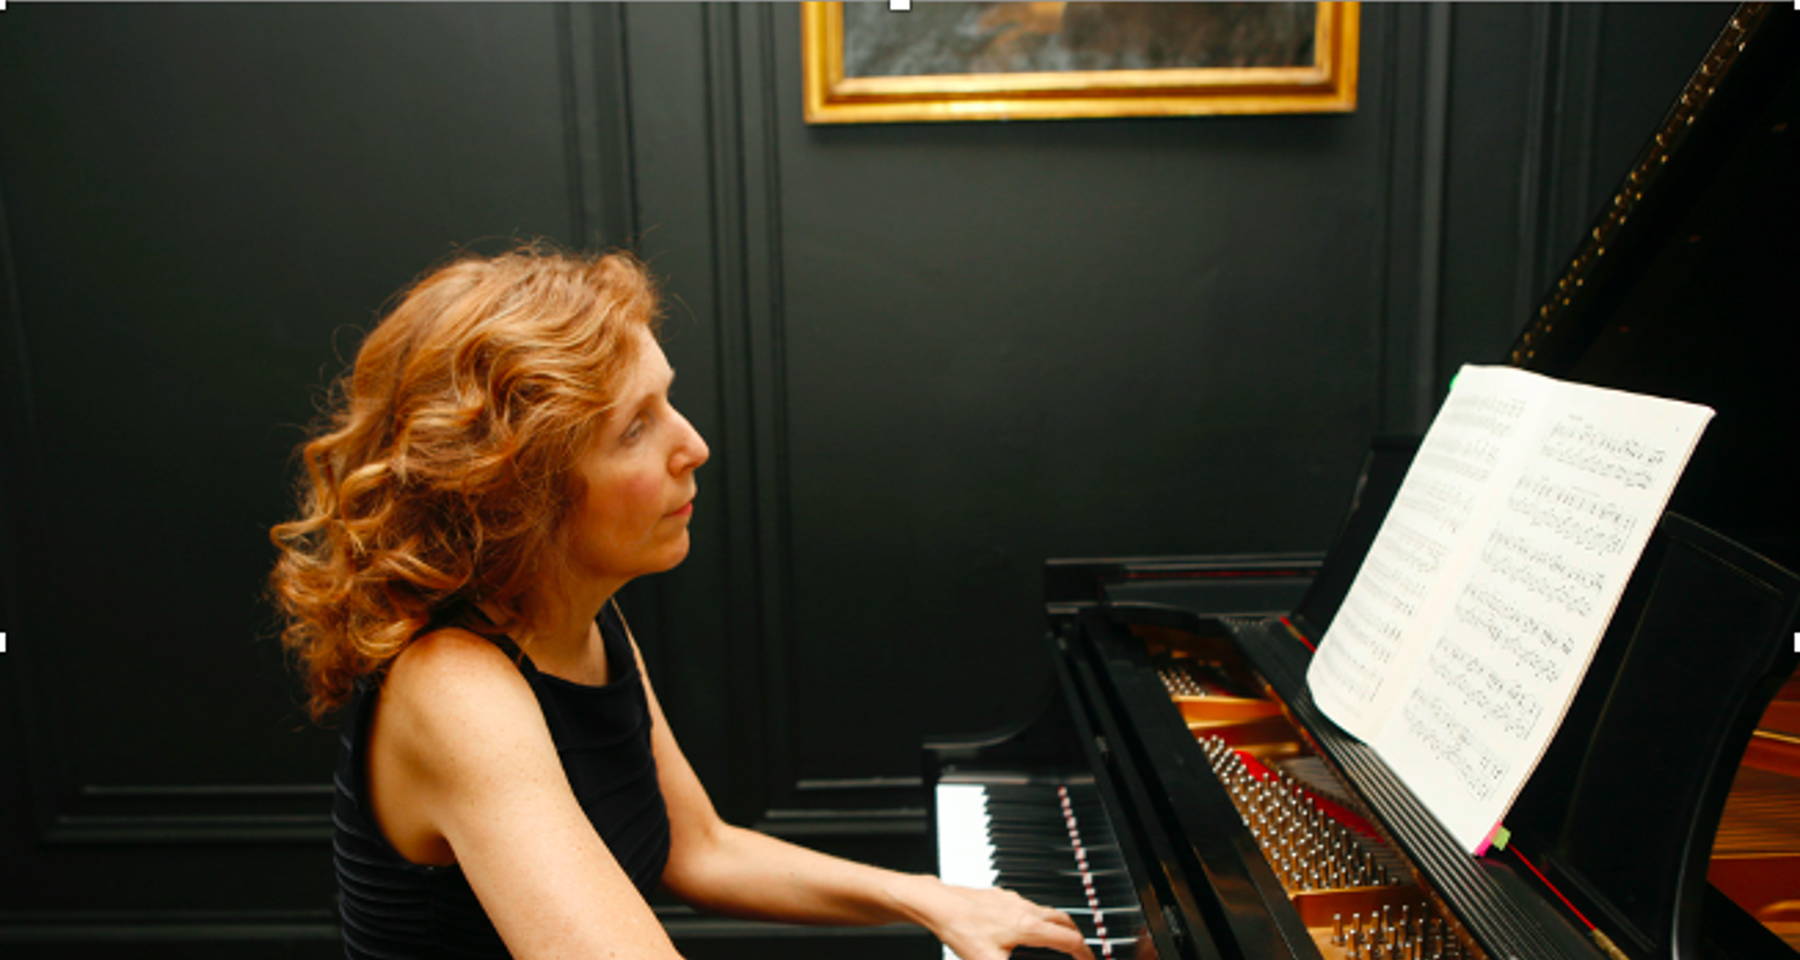 Earth Day 2021: Pianist Carolyn Enger performs "Resonating Earth"